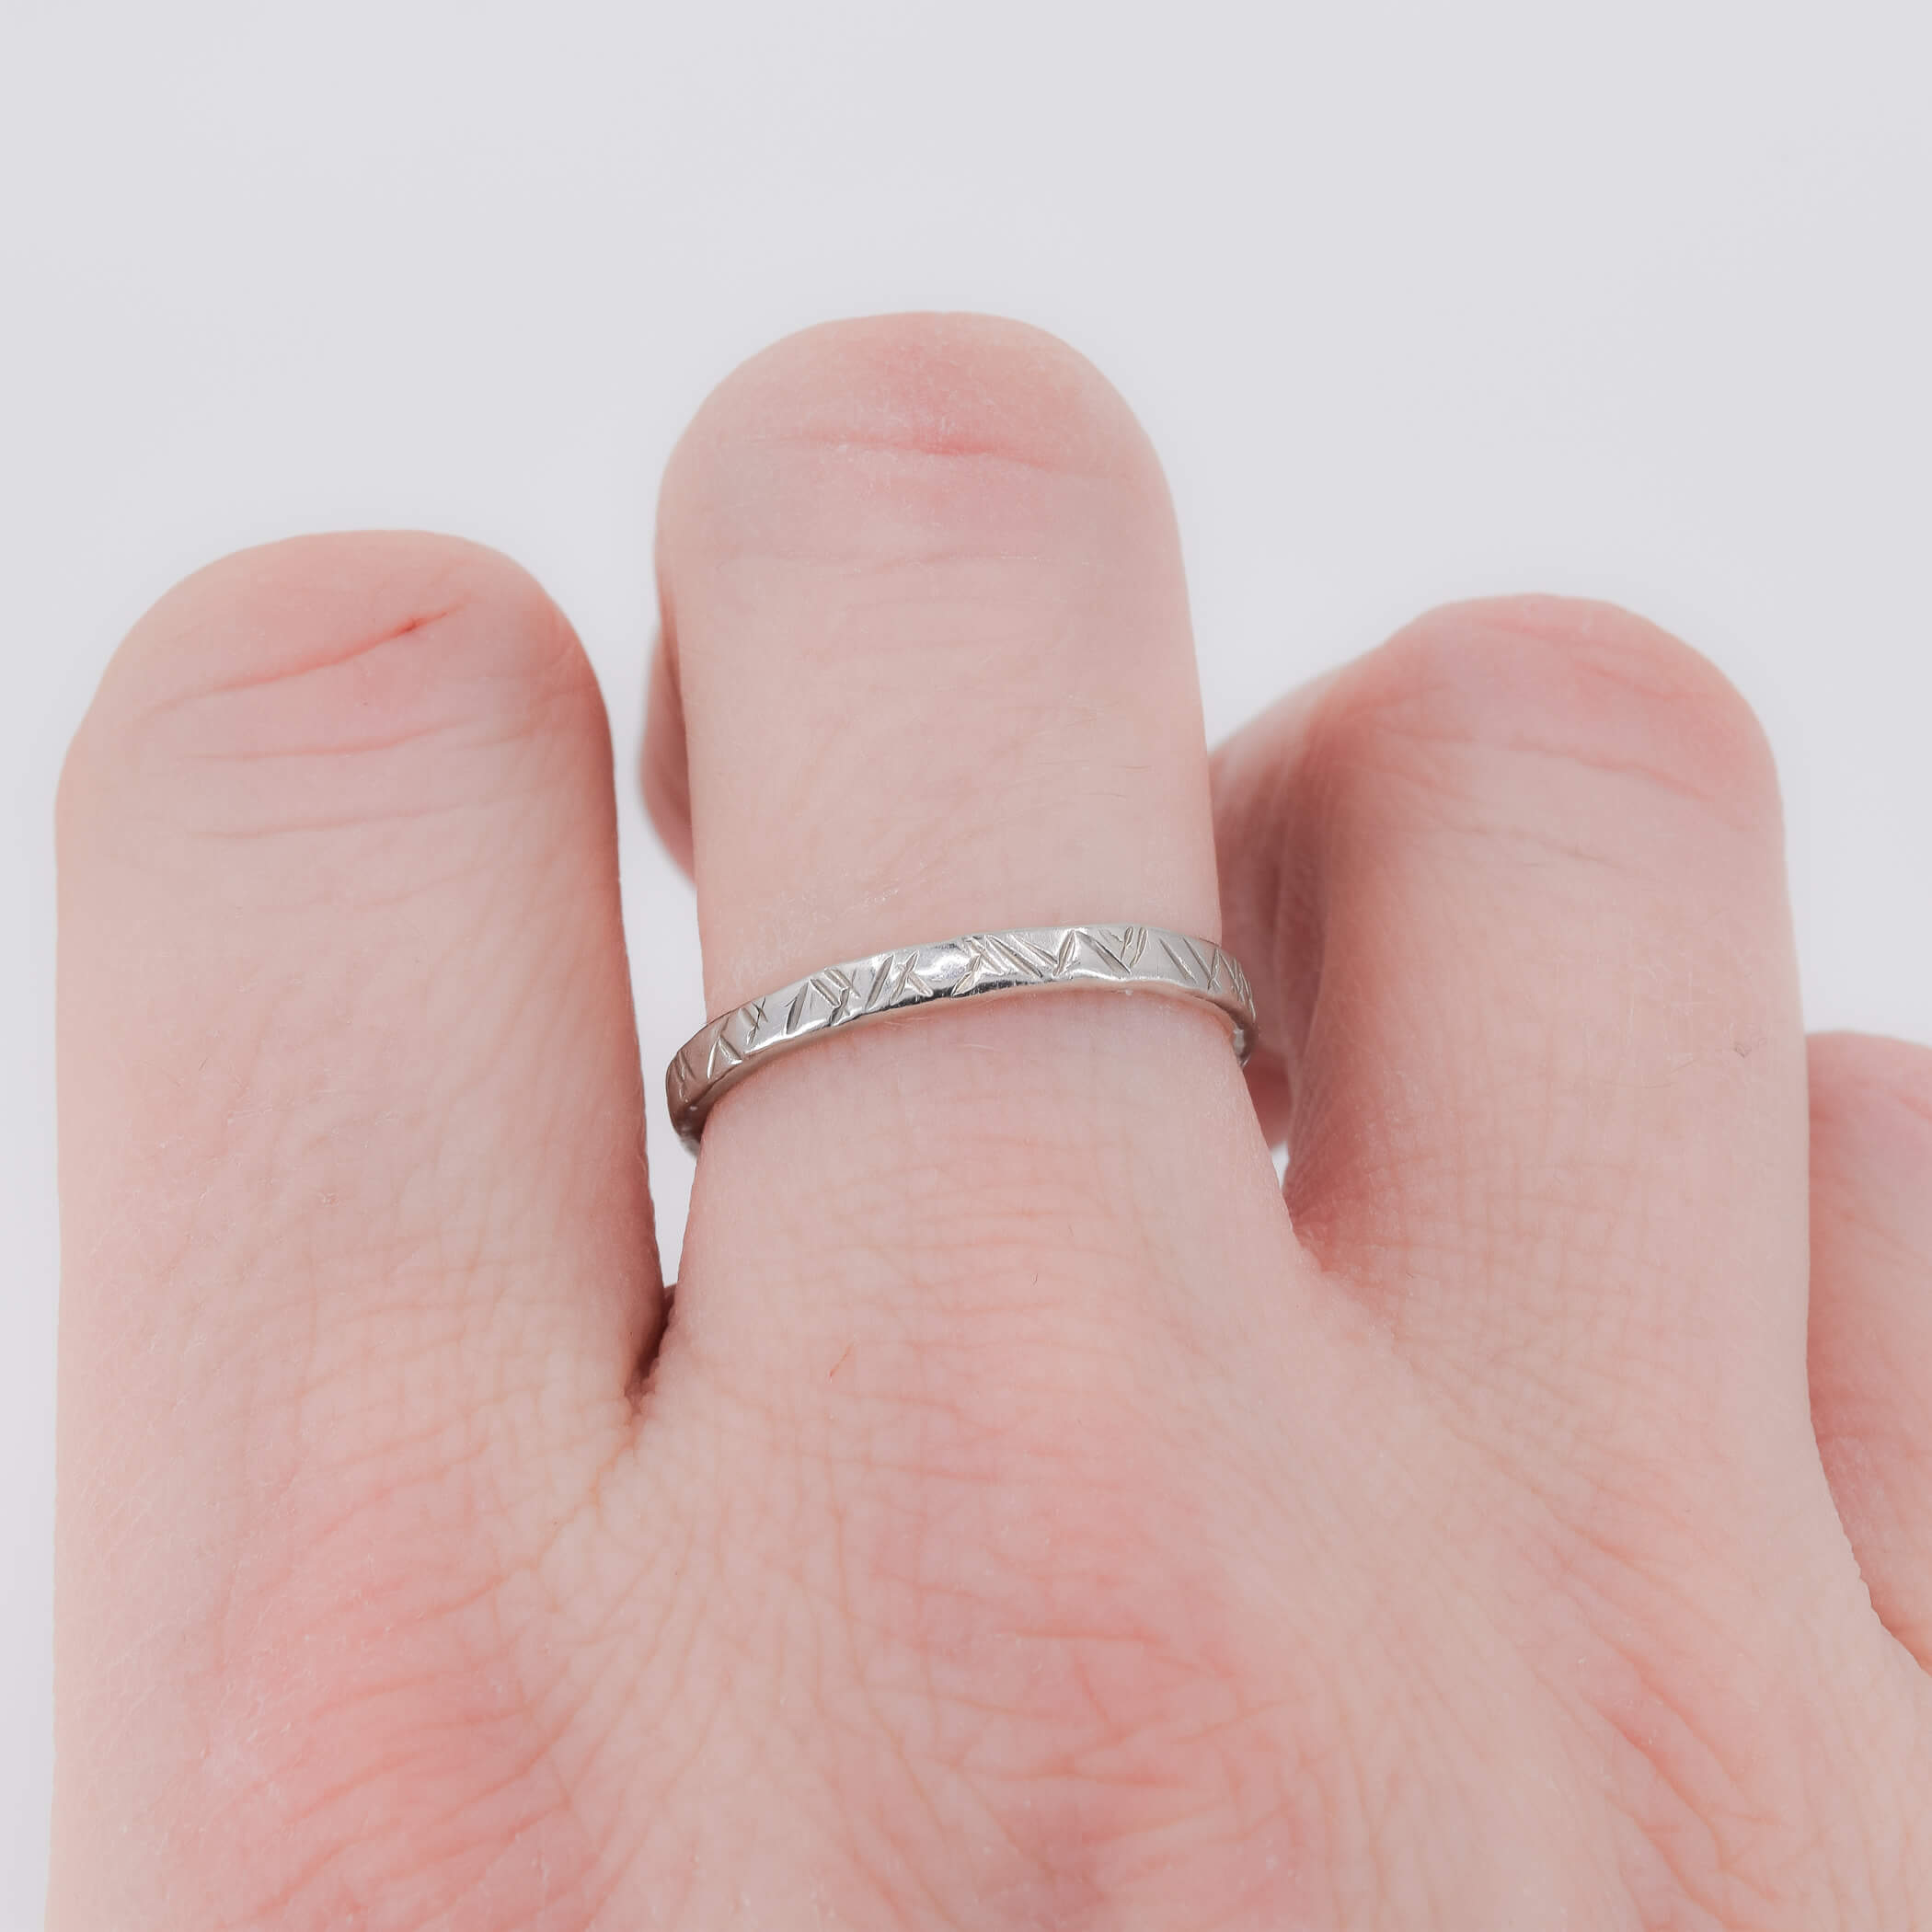 Criss cross textured ring sterling silver shown on finger